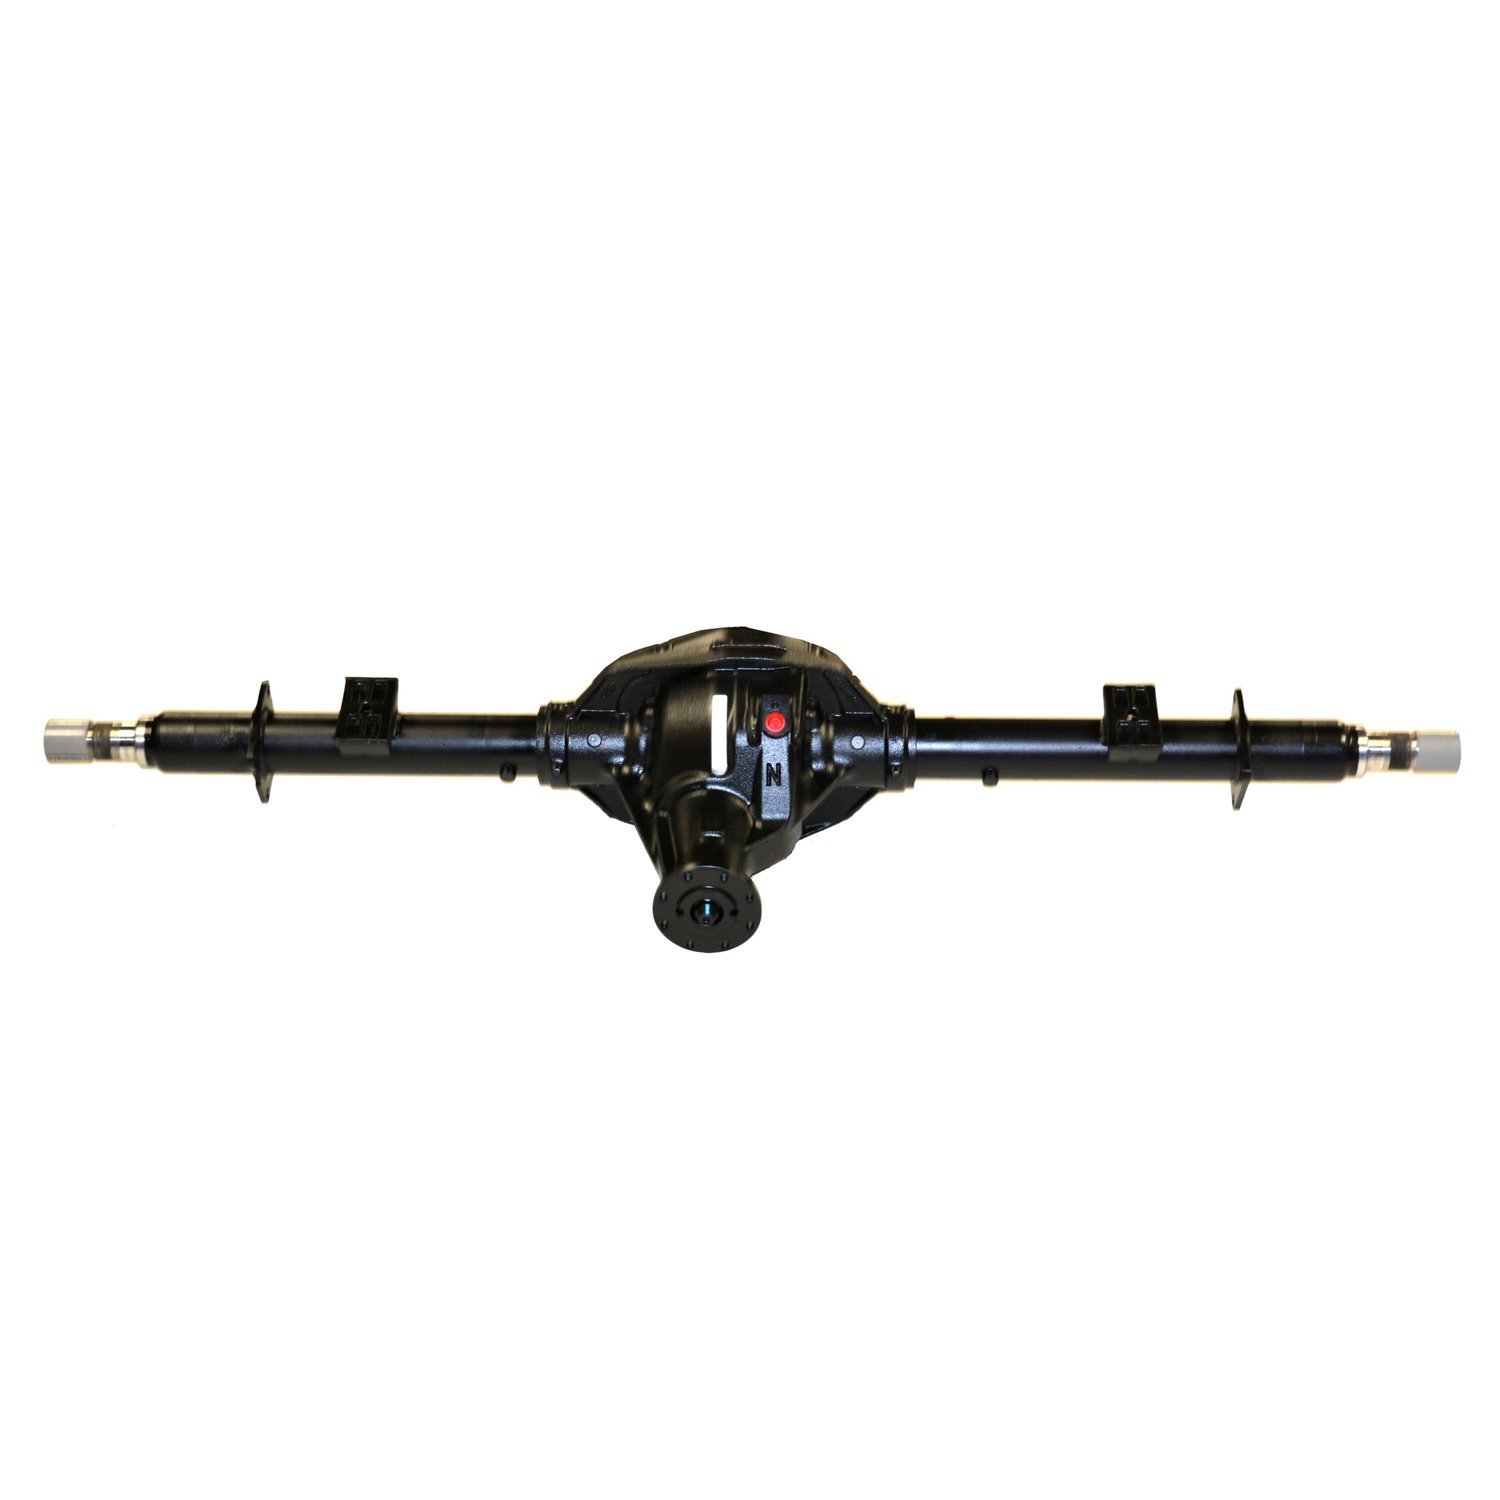 Remanufactured Complete Axle Assy for 10.25" 87-97 F350 3.55 w/o ABS, DRW, Cab Chassis